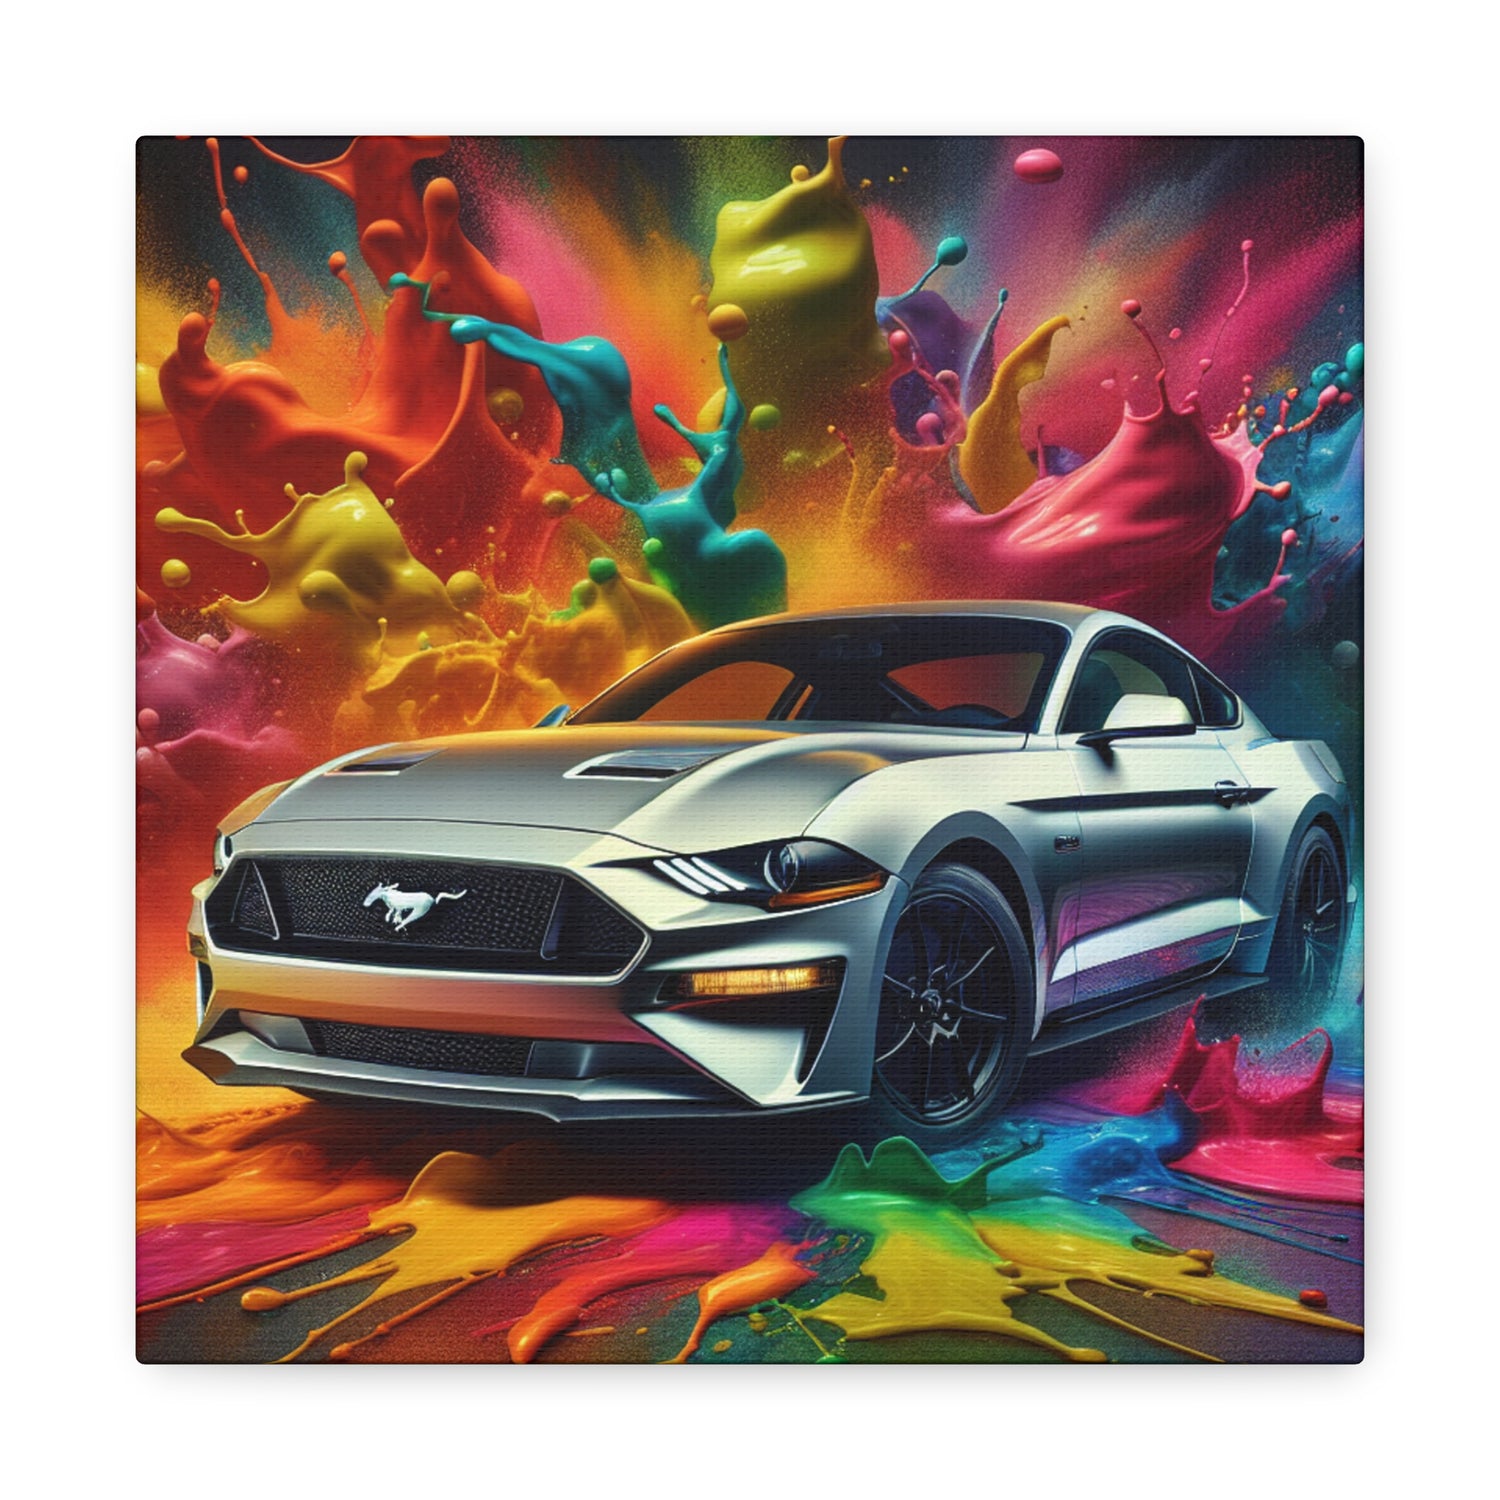 Vintage Ford Mustang Wall Art, Classic Car Canva Painting - Ideal for Man Cave, Garage Décor, Car Enthusiast Gift, Automotive Art